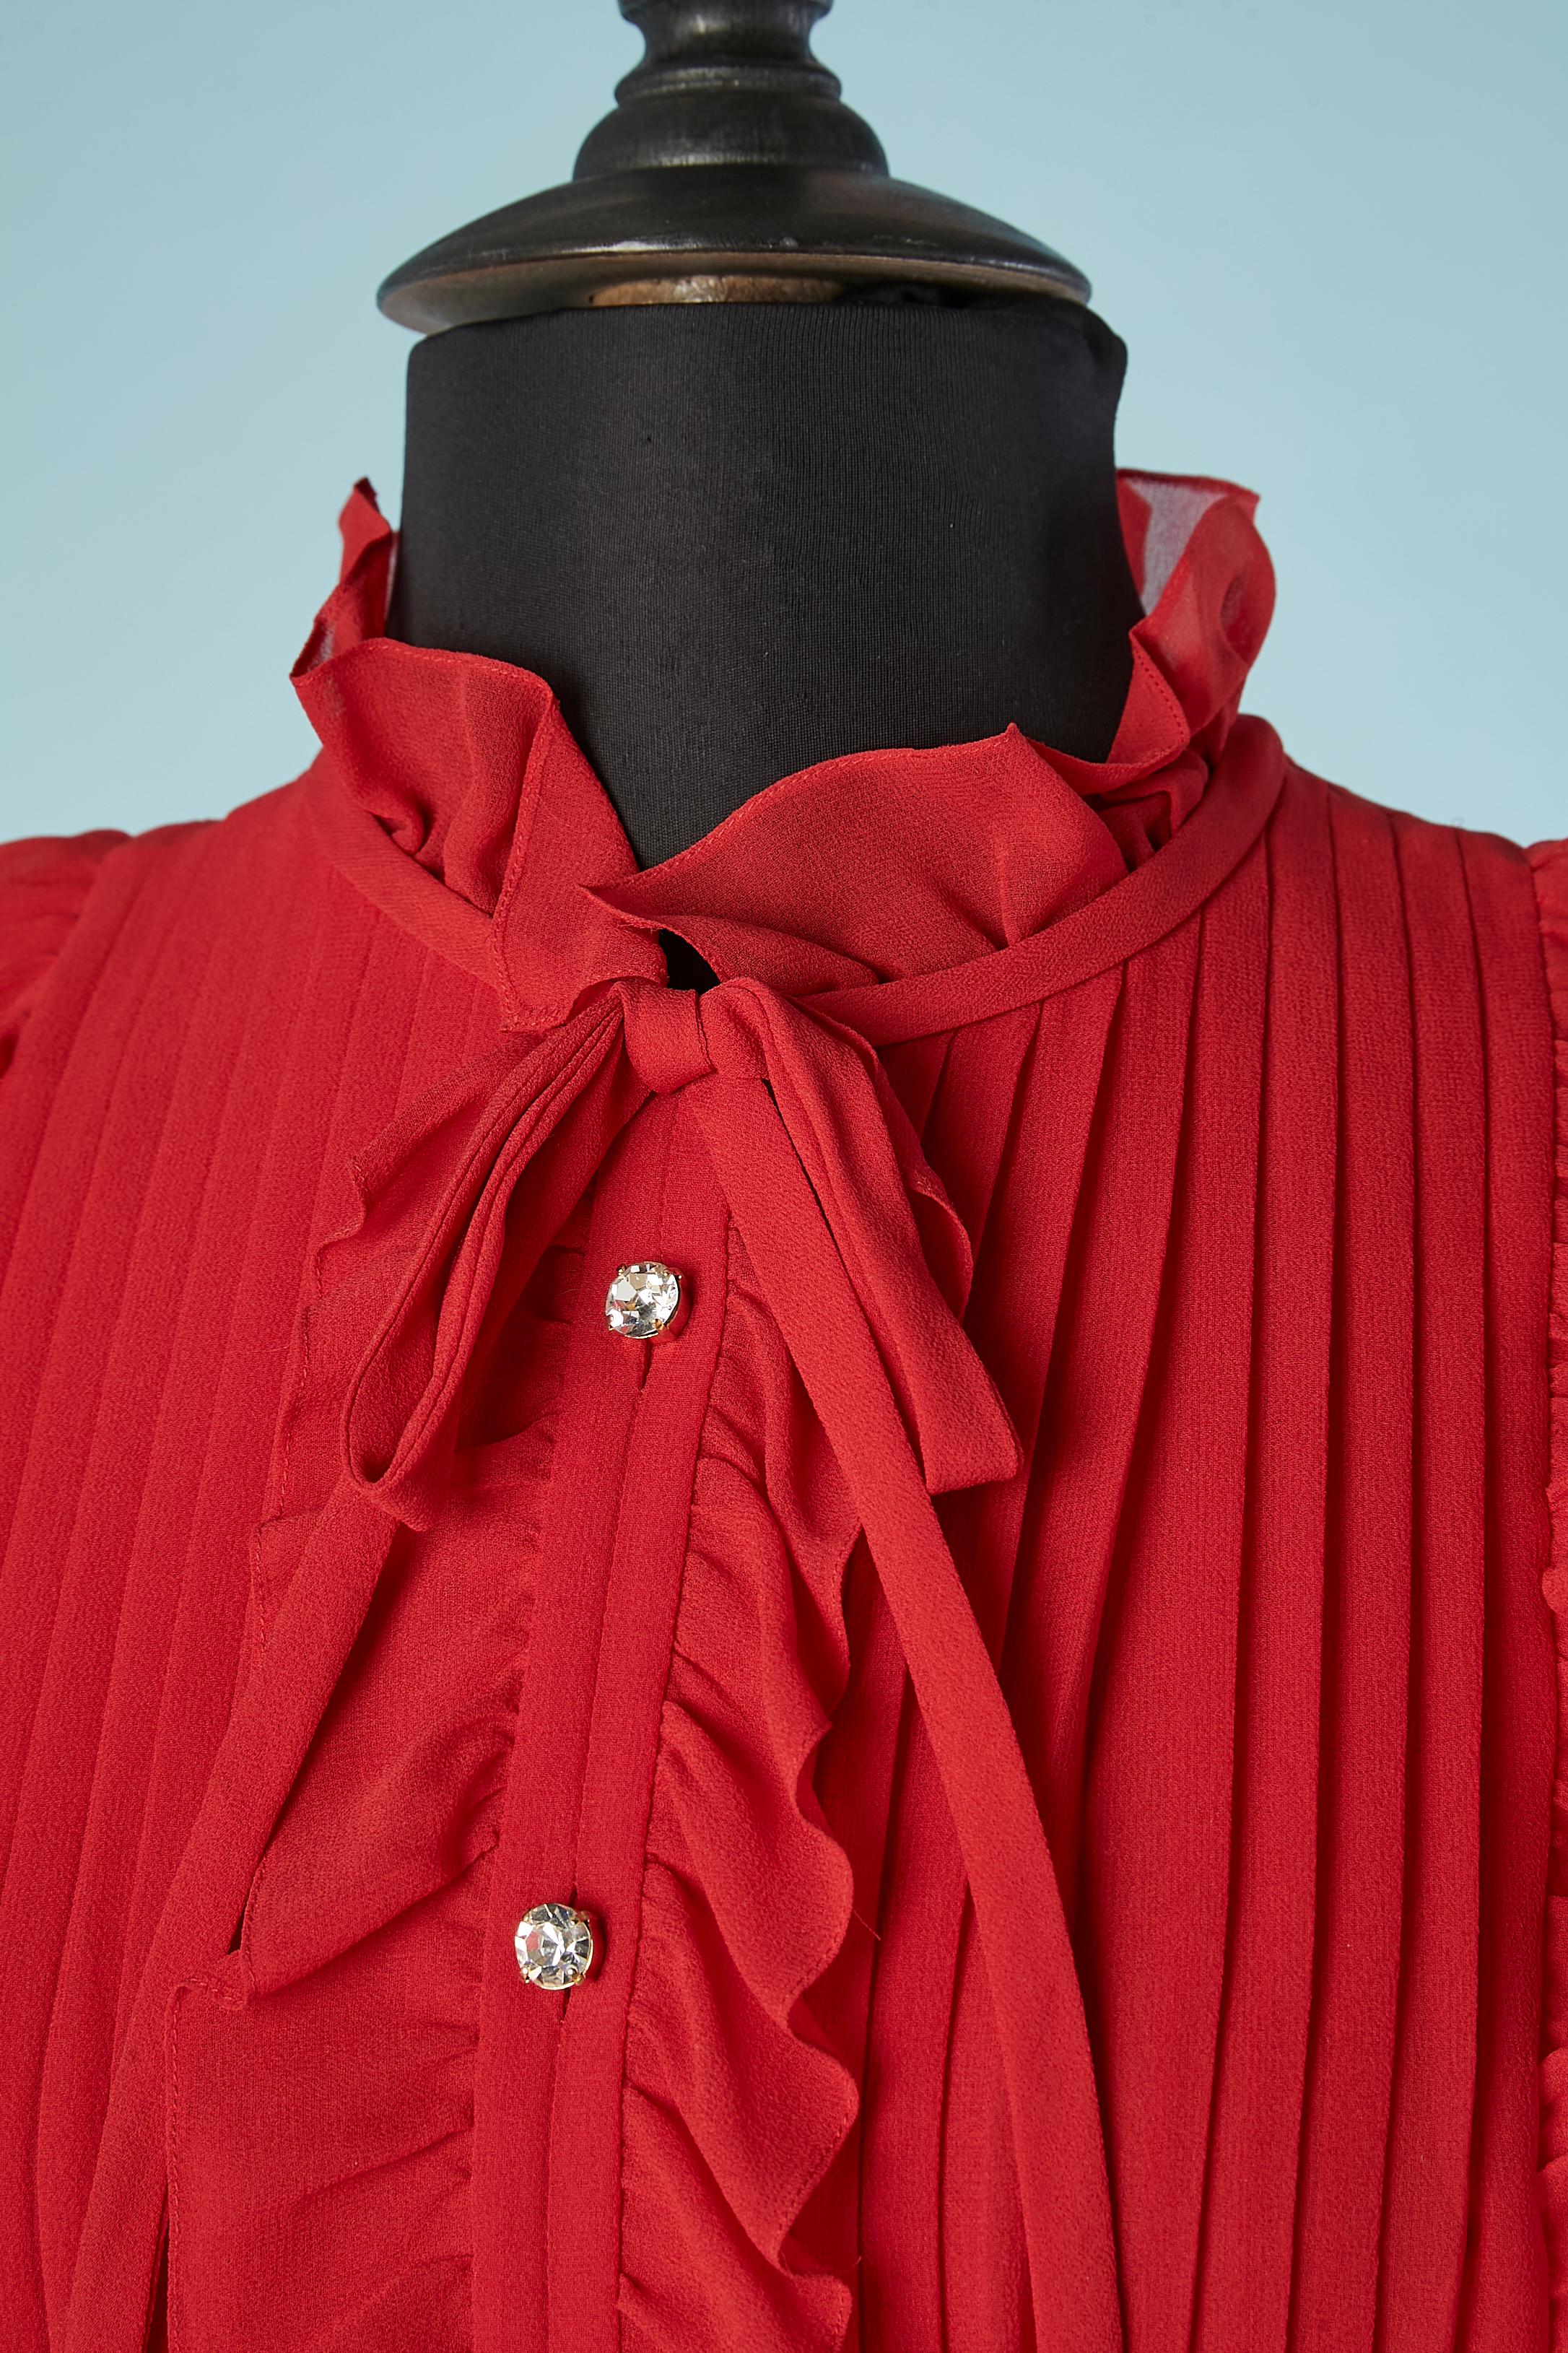 Red silk chiffon pleated cocktail dress with ruffles. Rhinestone buttons and bow on the collar. 
SIZE 38
Venet was born in Lyon, France. After training at the École Professionnelle des Tailors de Lyon he apprenticed at age 14 with 